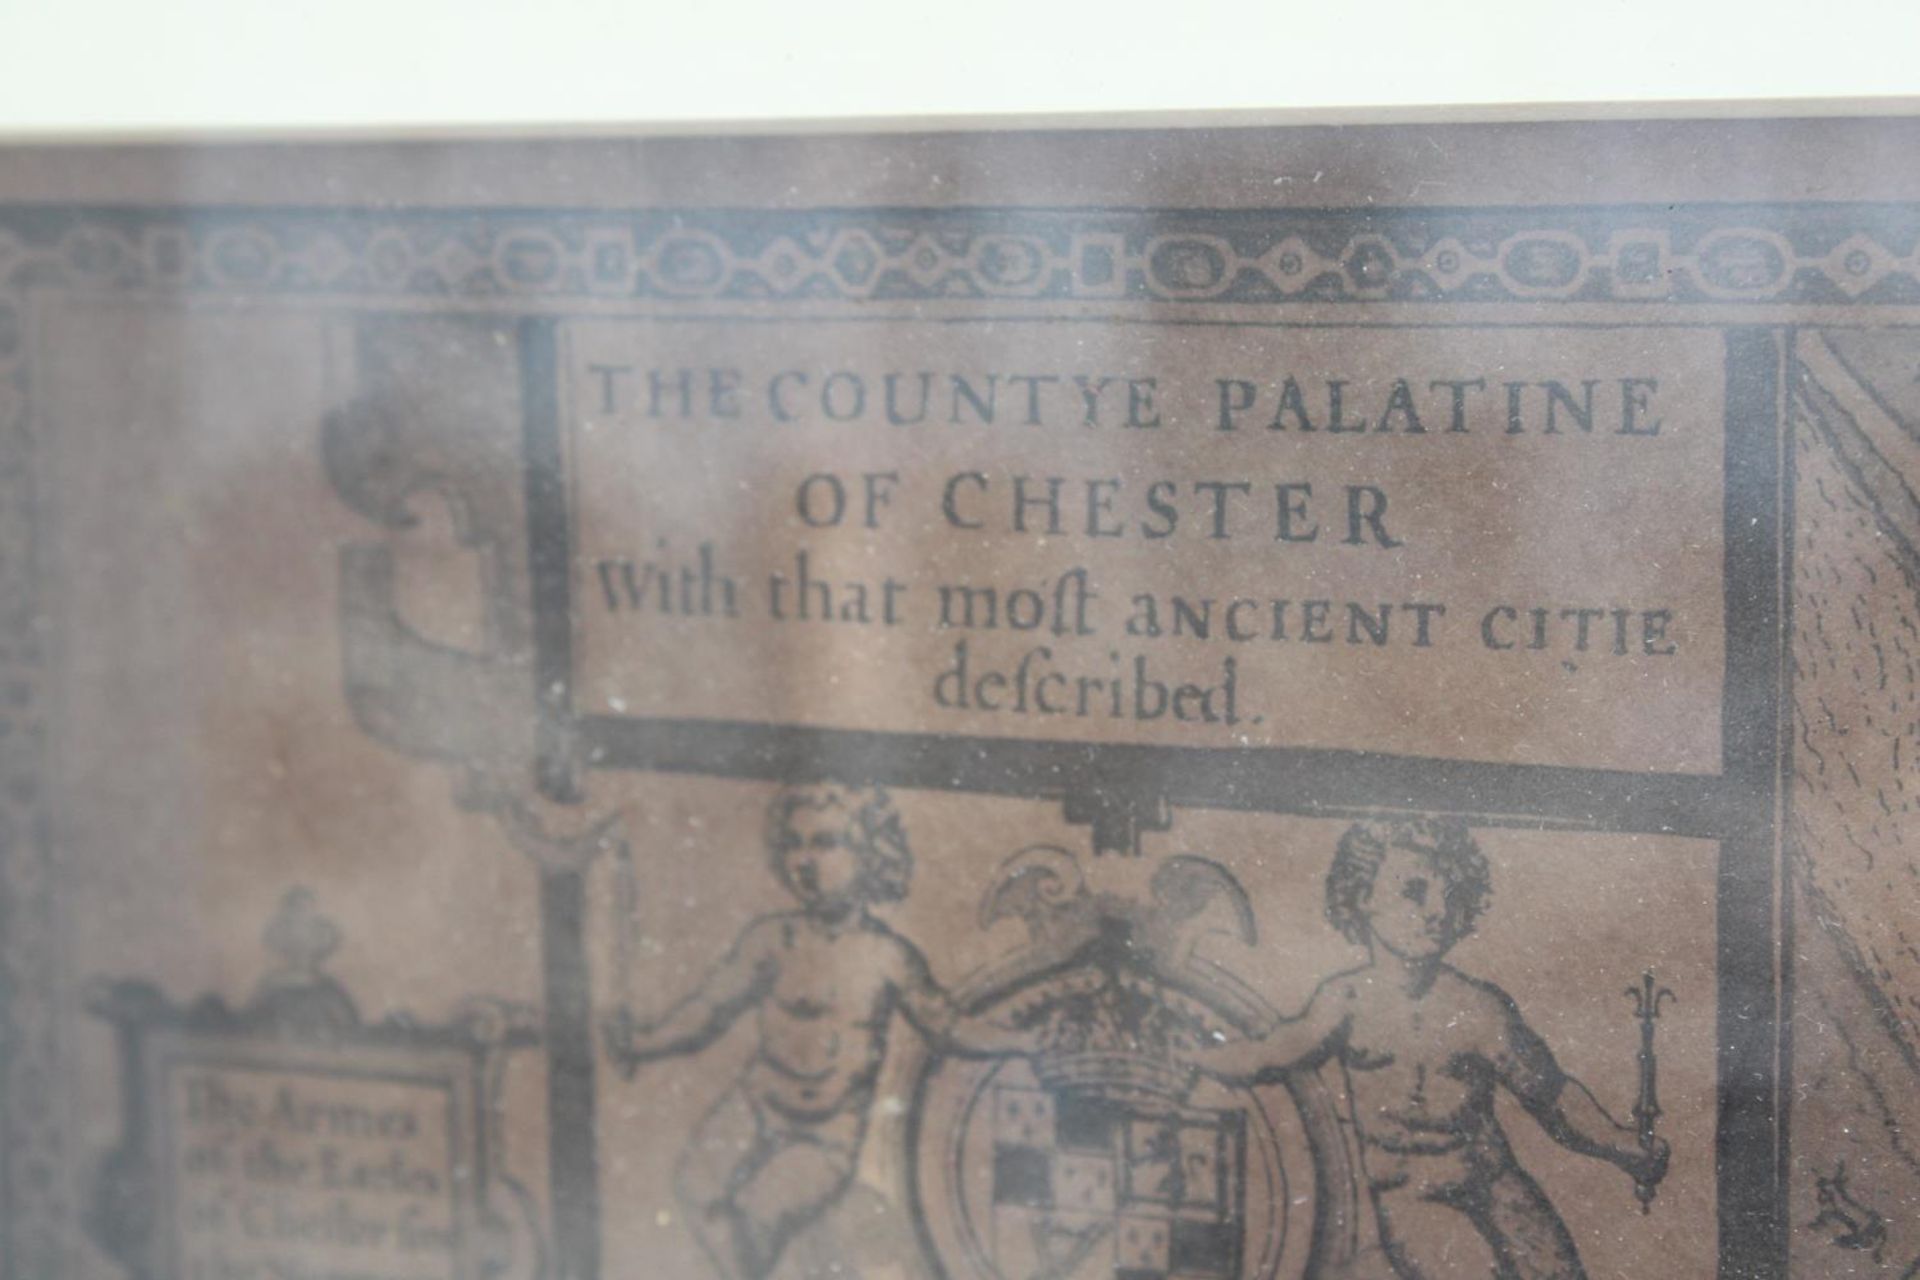 A FRAMED VINTAGE MAP OF 'THE COUNTYE PALATINE OF CHESTER' - Image 3 of 6